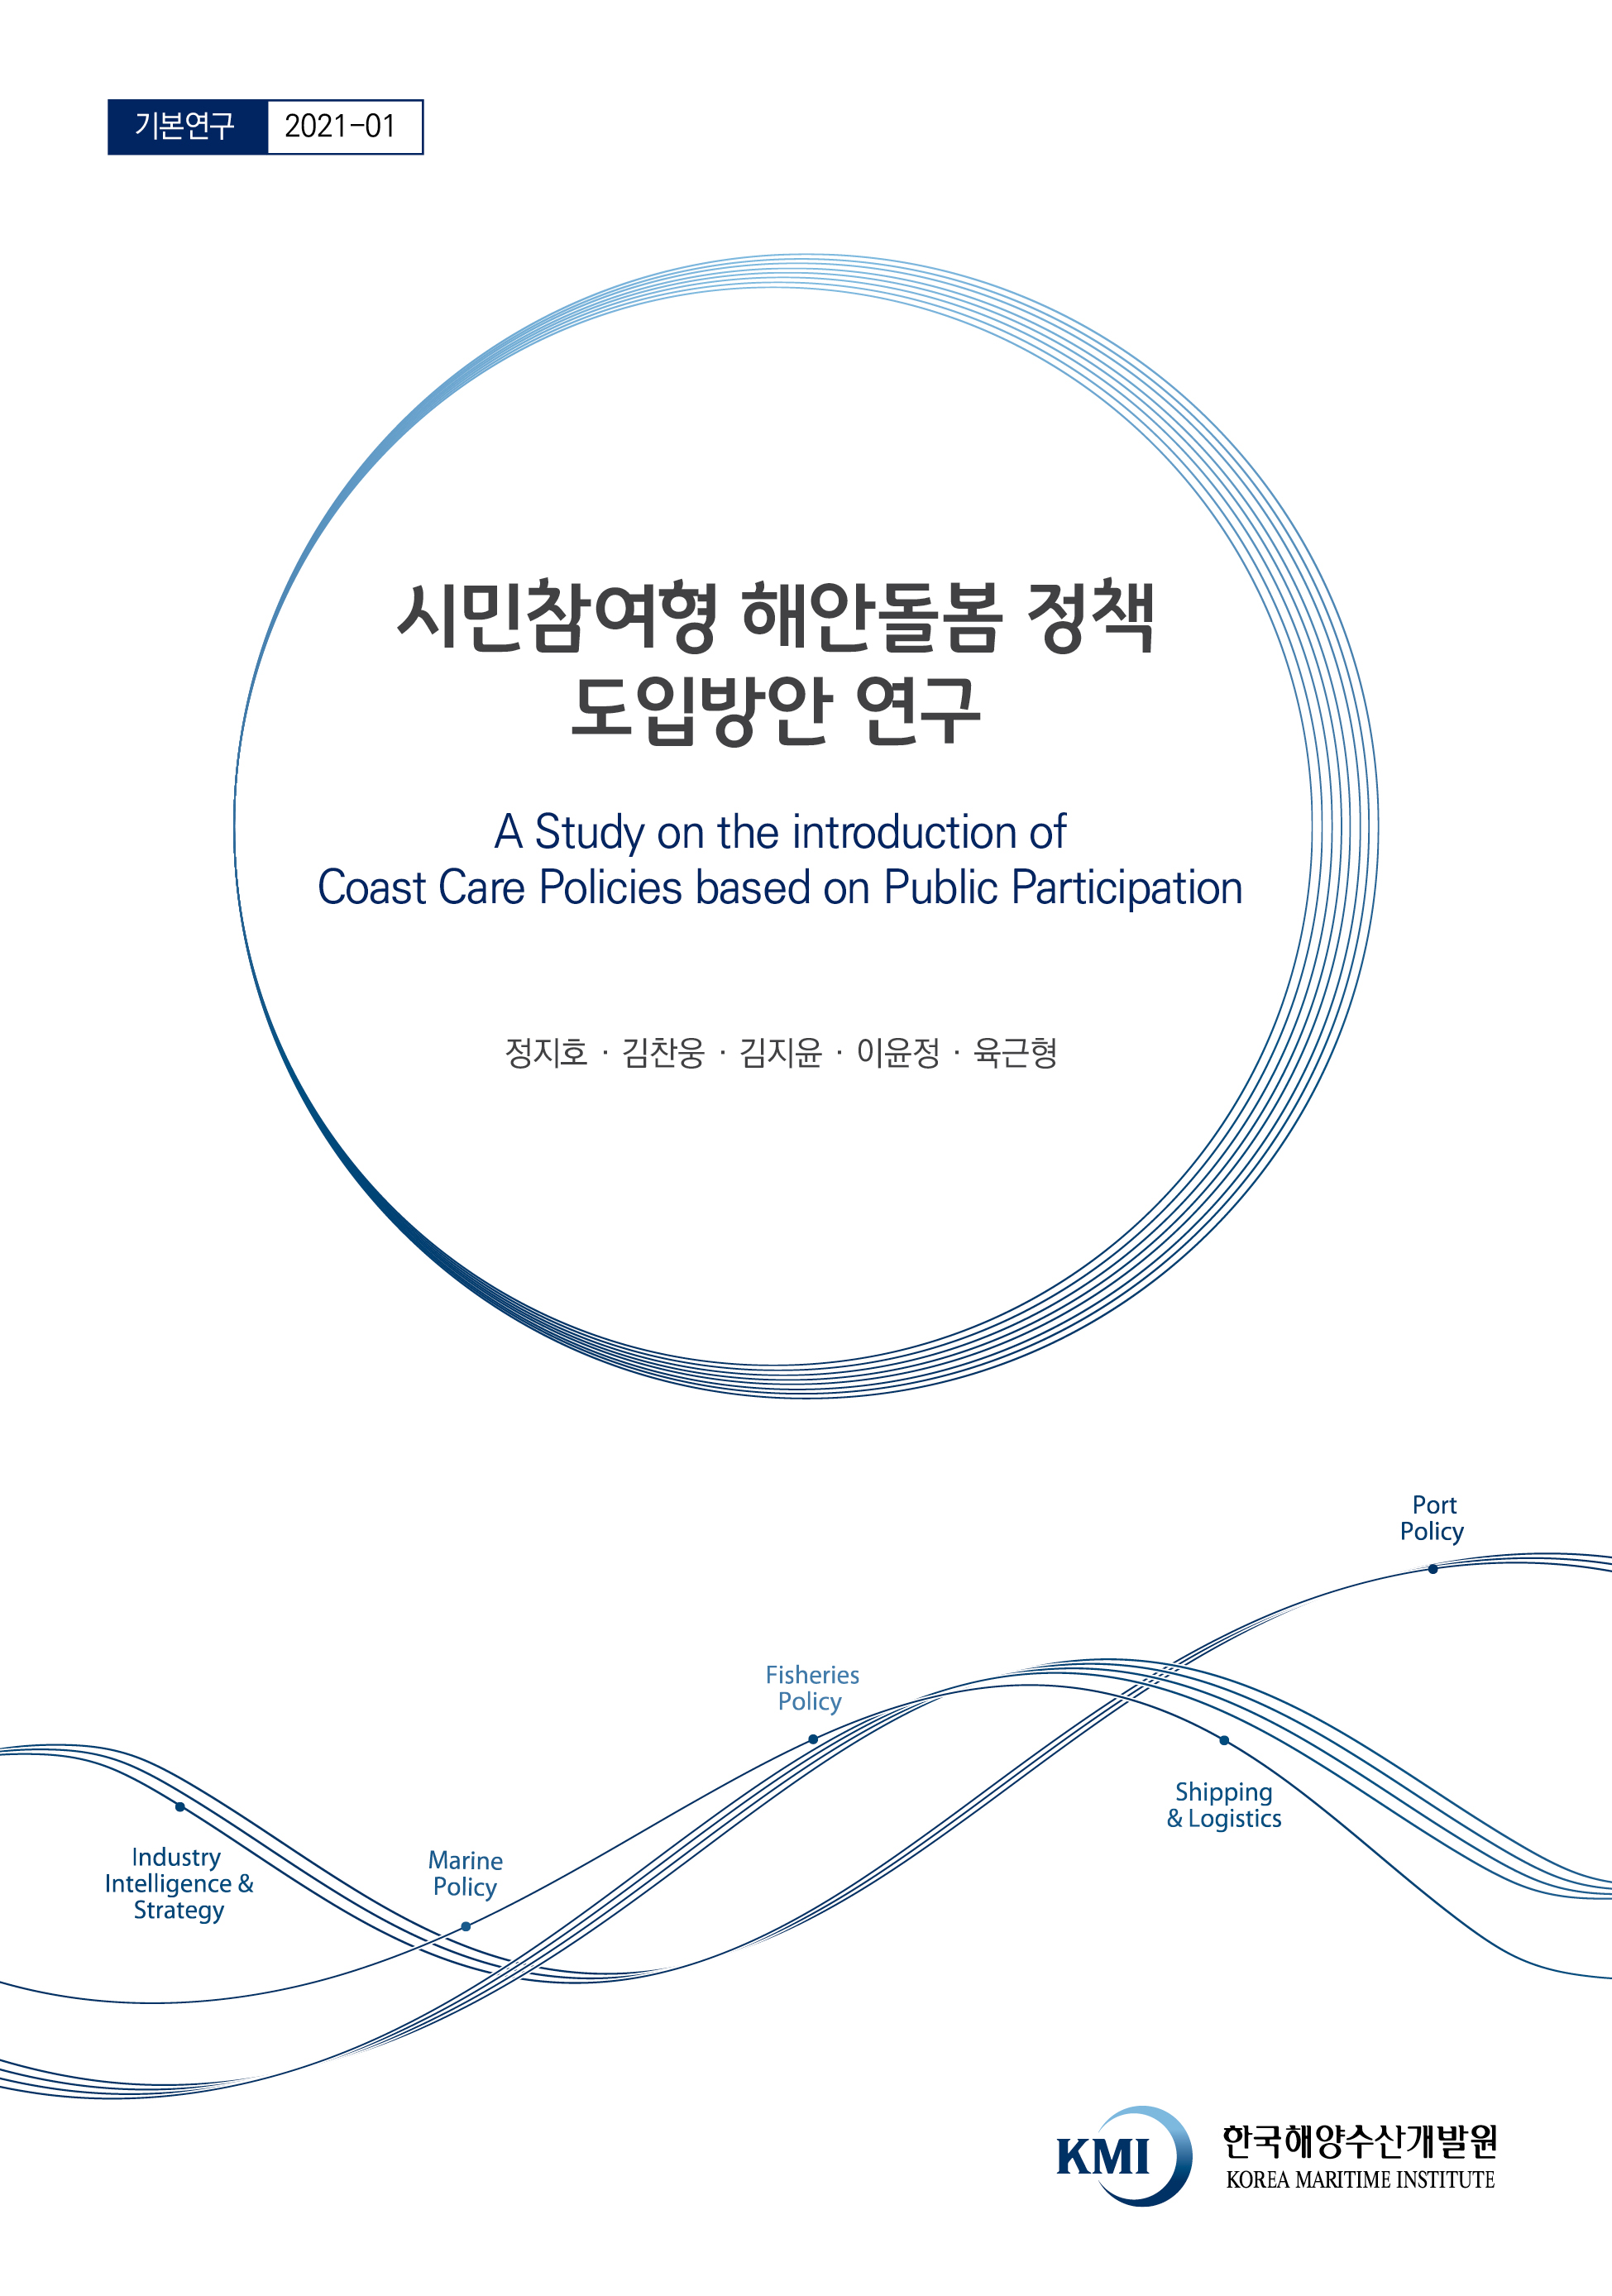 A Study on the introduction of coast care policies based on public participation